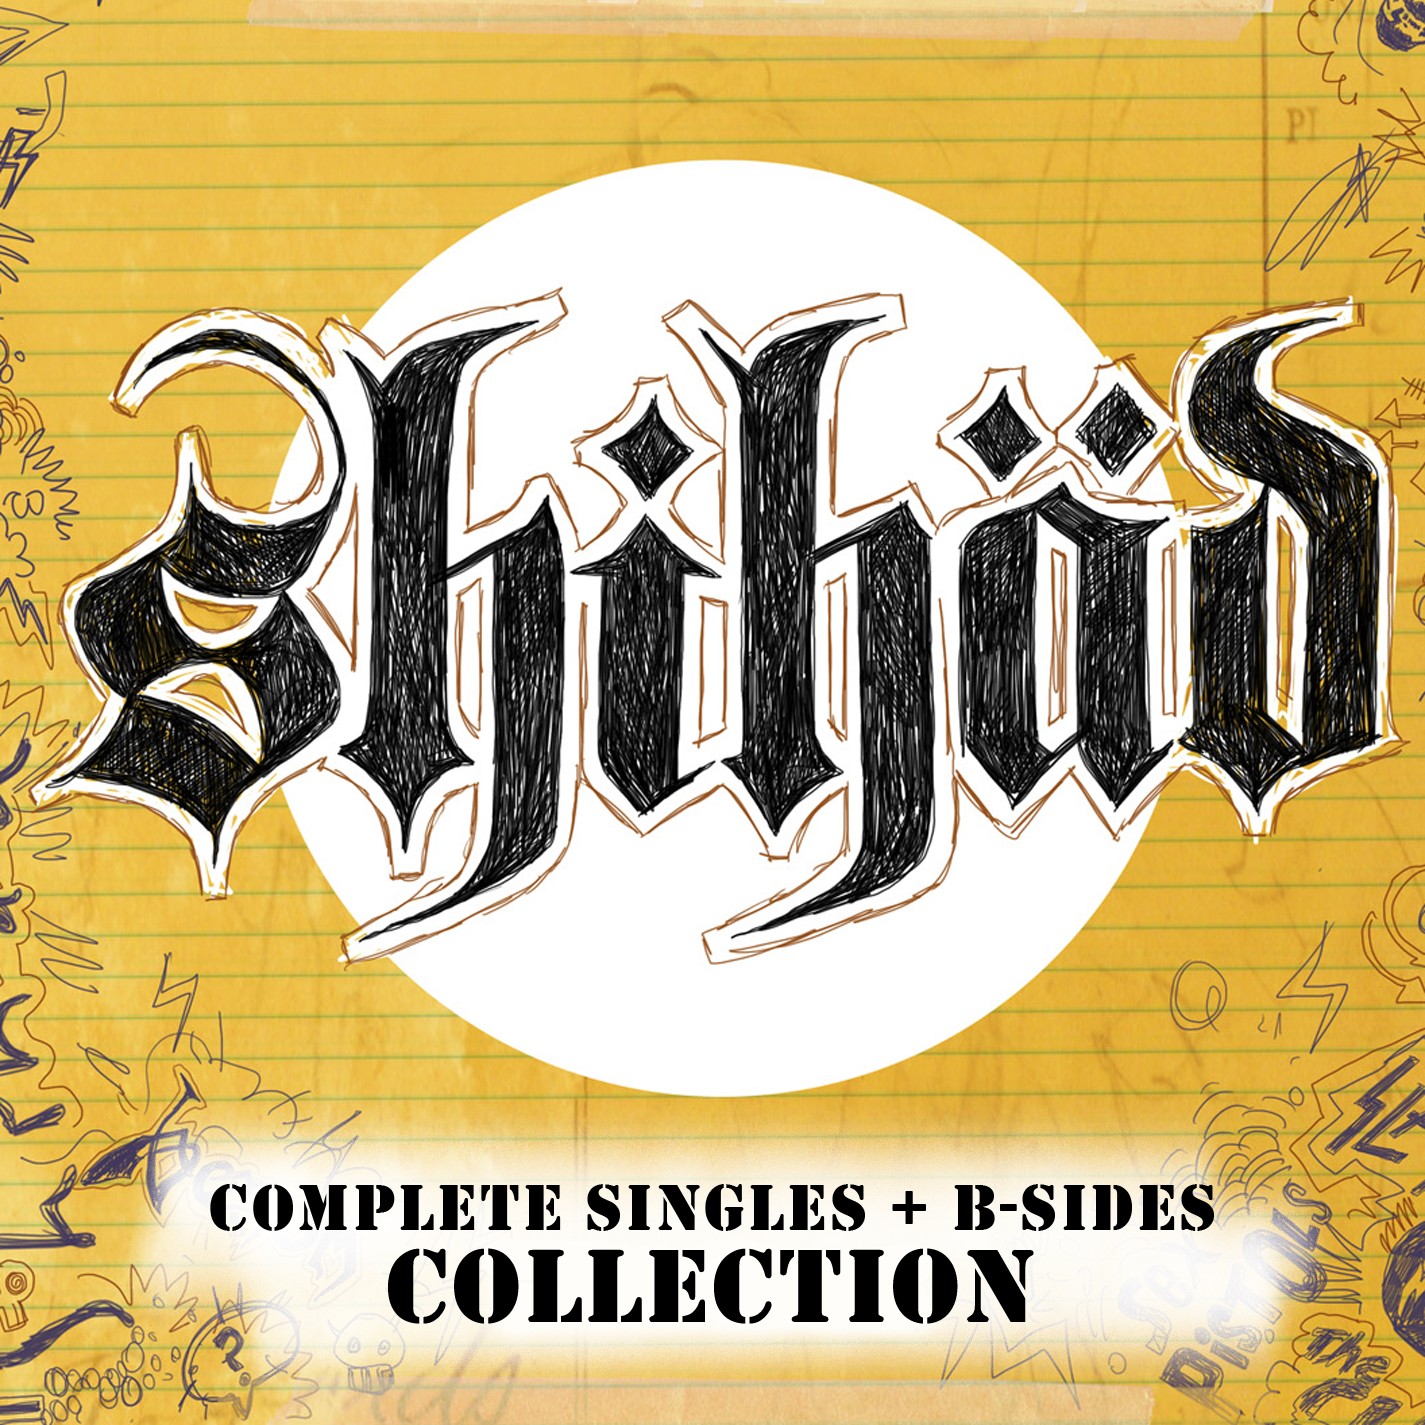 Shihad COLLECTION iTUNES.jpg